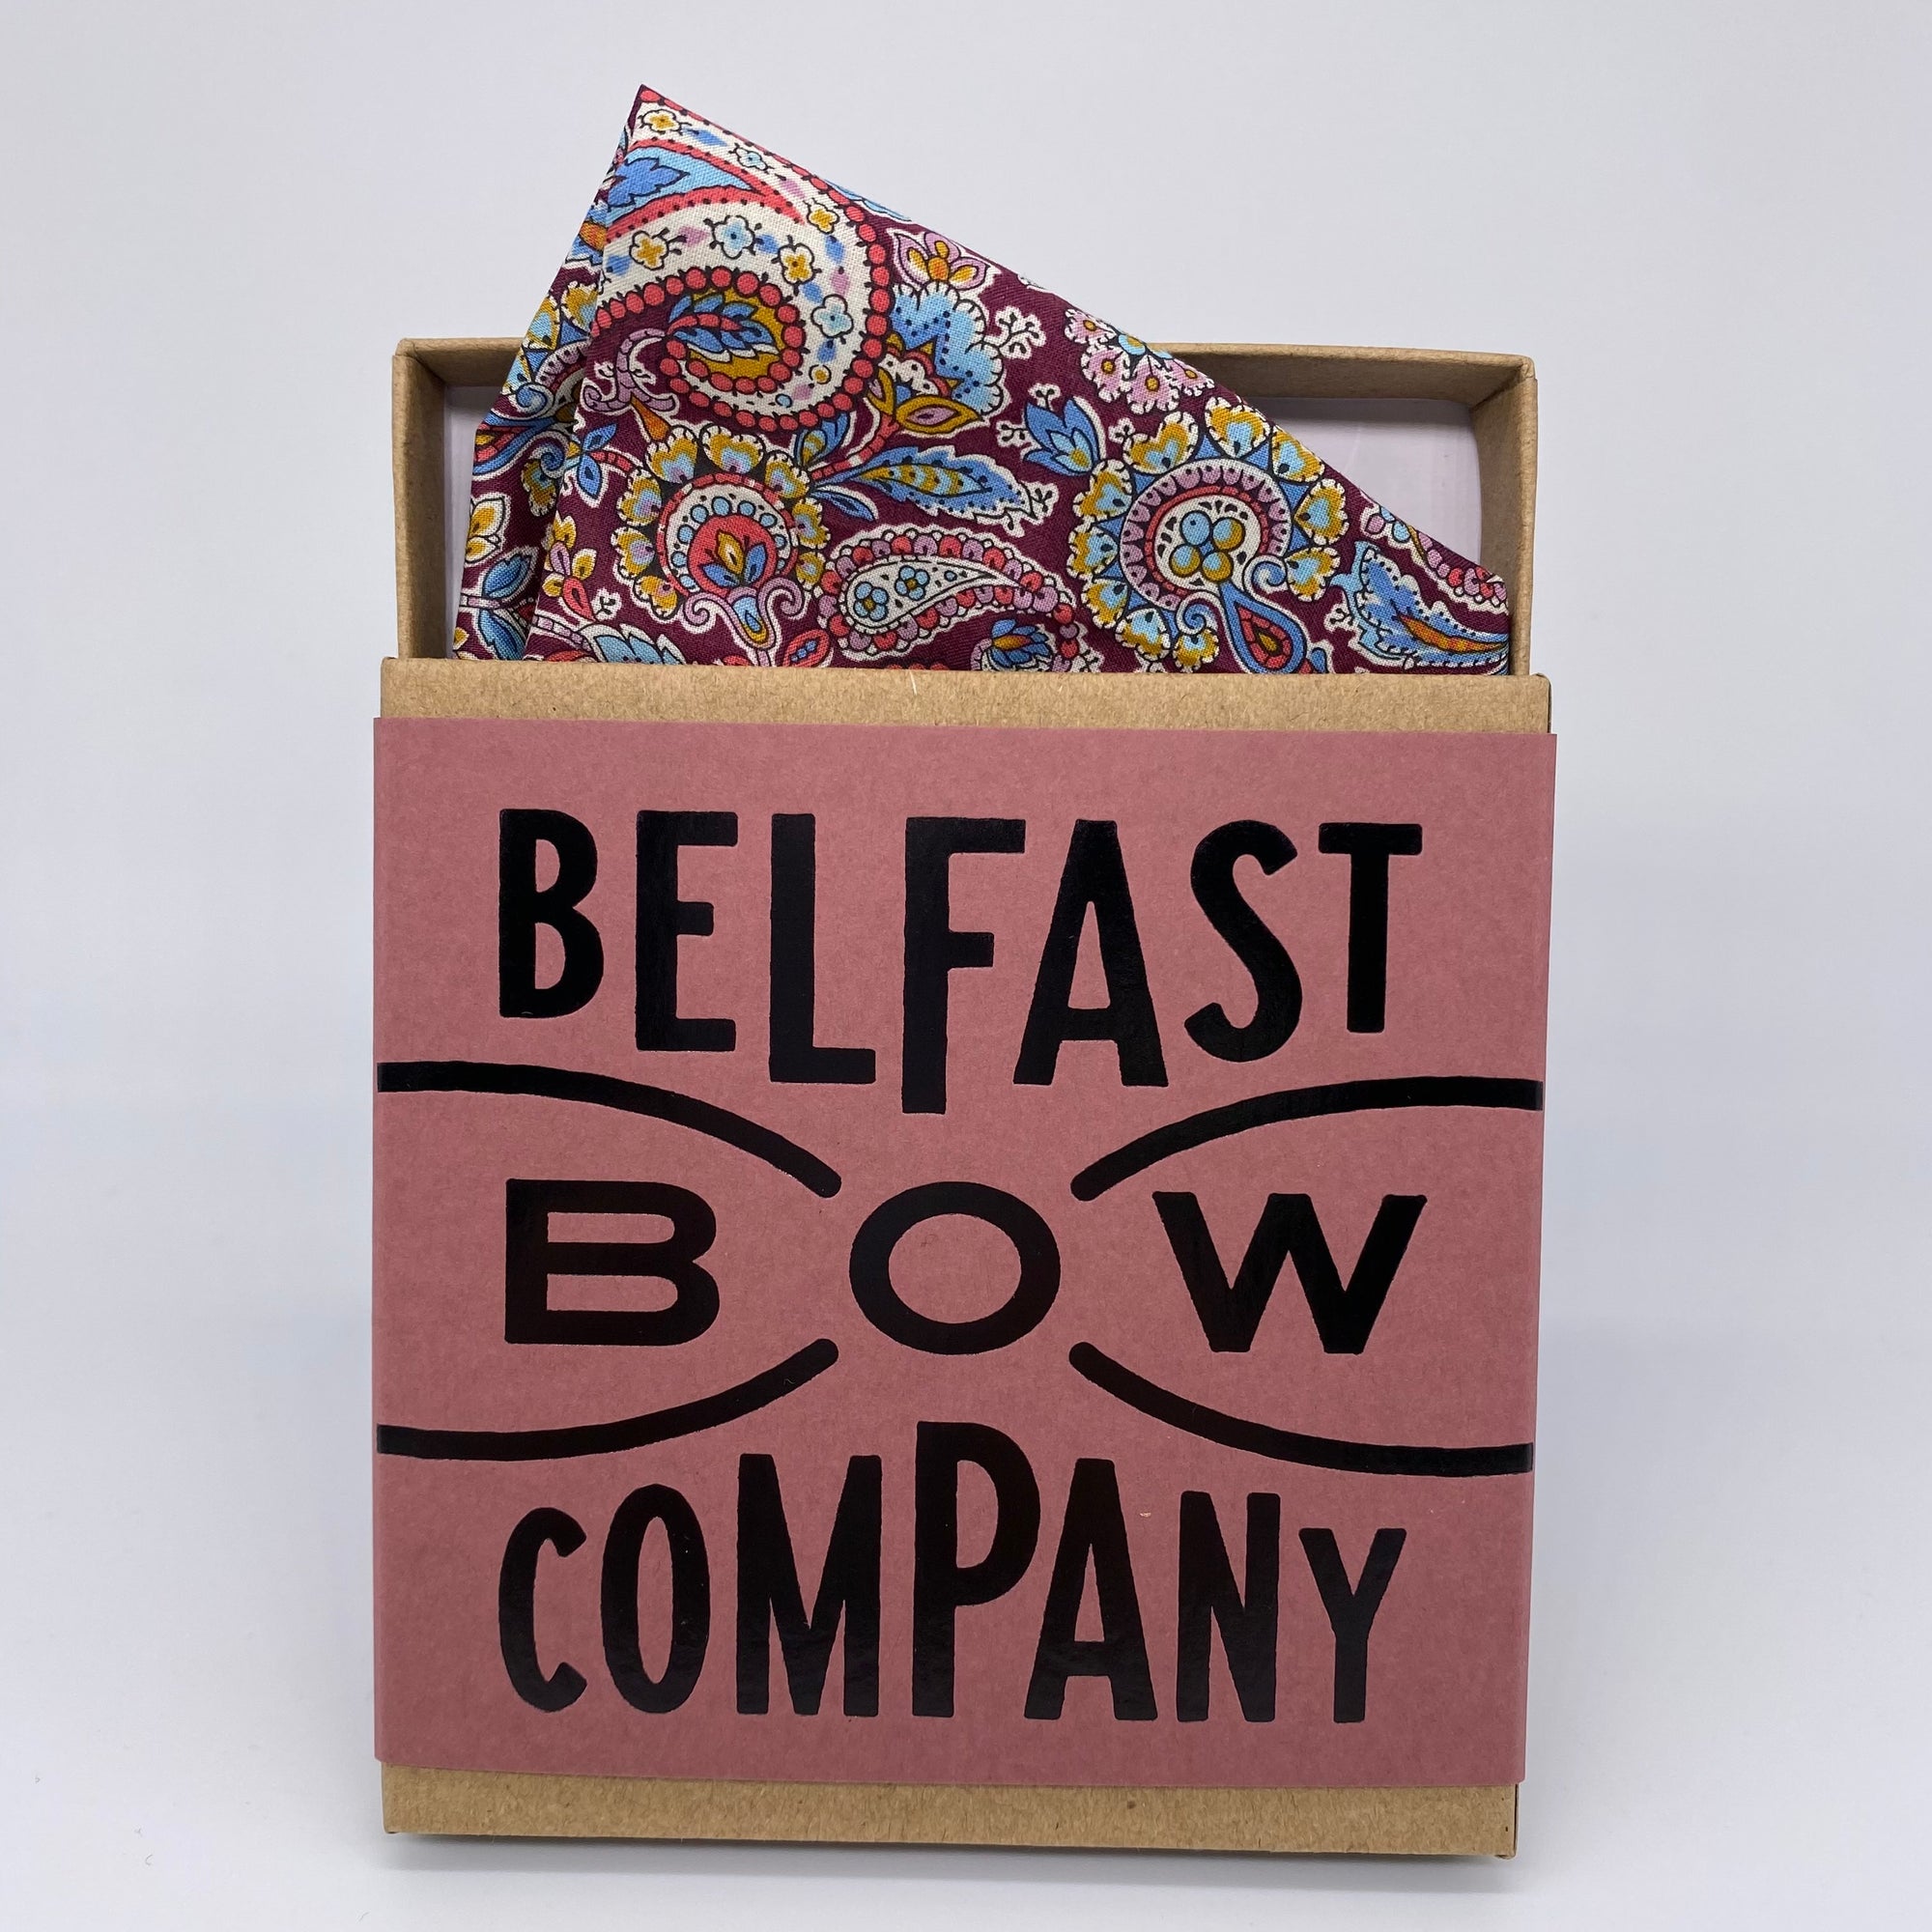 Liberty of London Pocket Square in Burgundy Paisley by the Belfast Bow Company